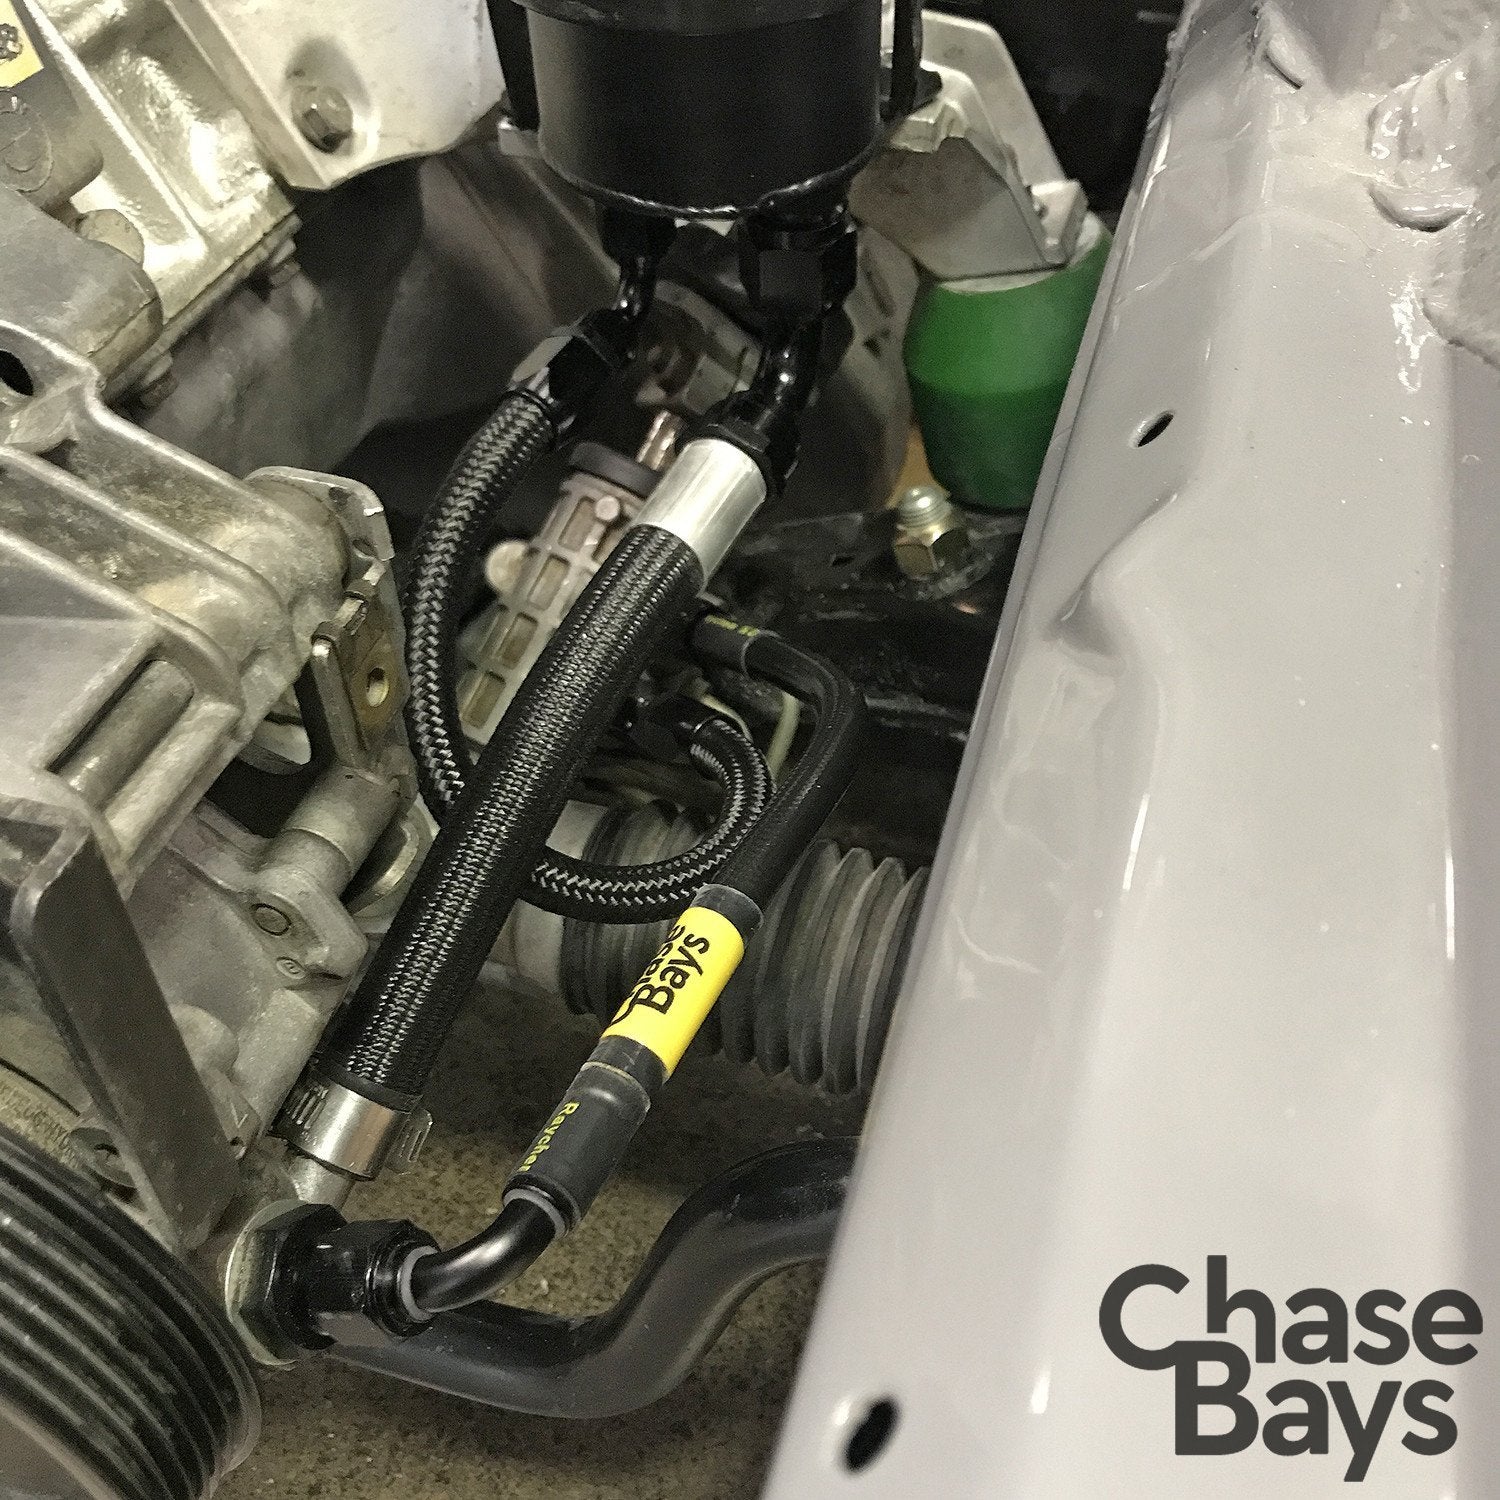 CHASE BAYS BMW E46 high pressure hose power steering with BMW engine